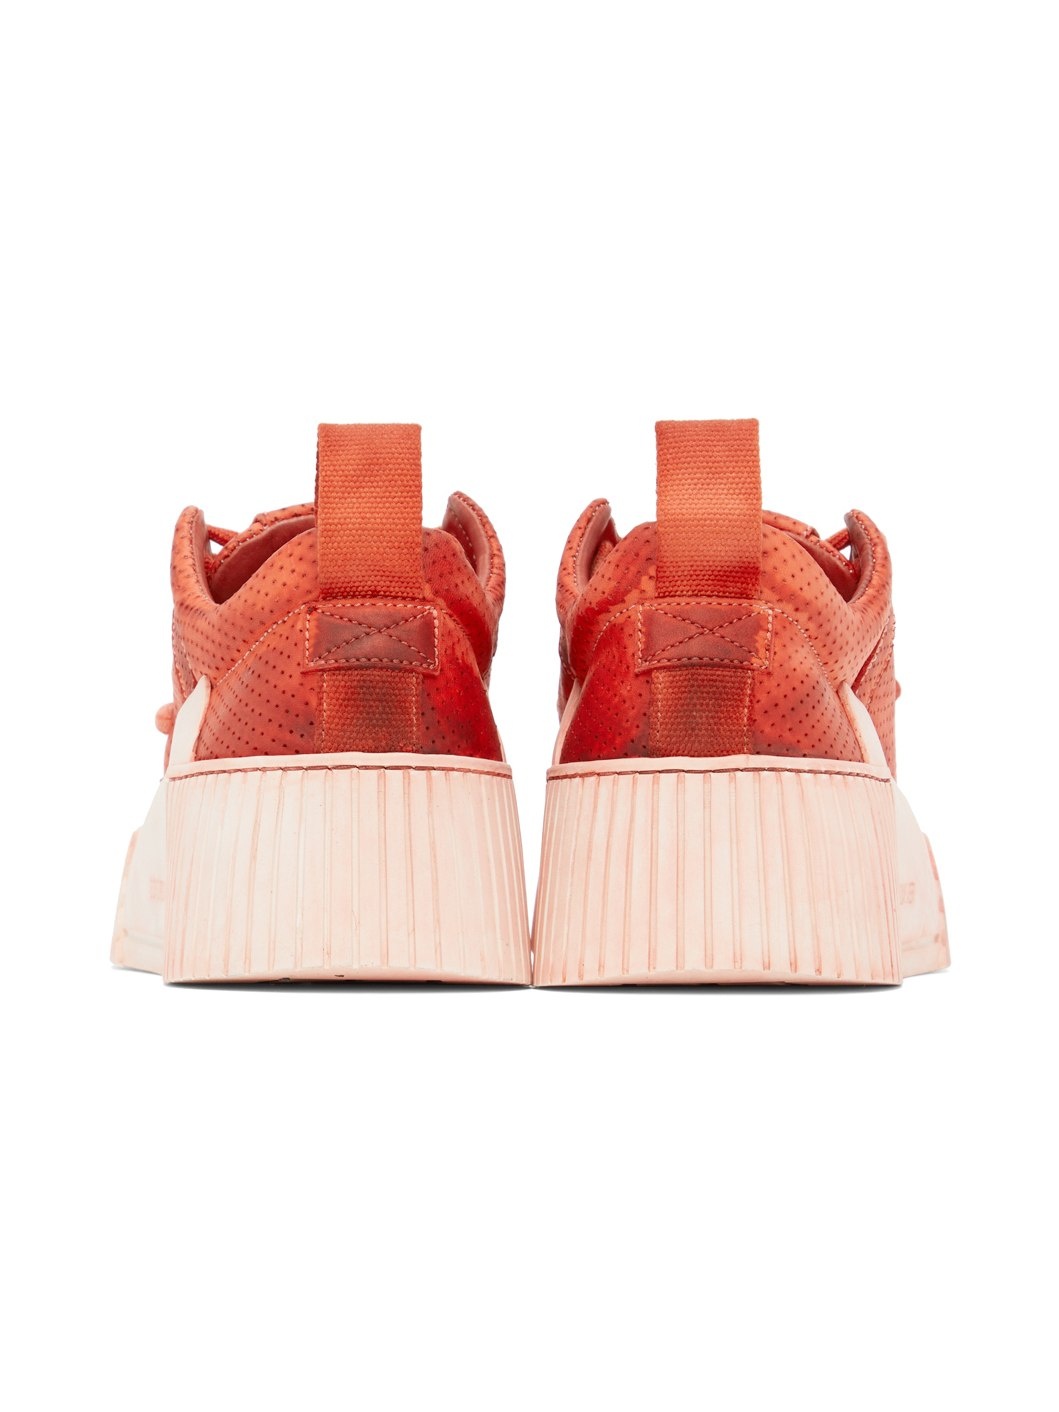 SSENSE Exclusive Red Bamba 2.1 Sneakers - 2